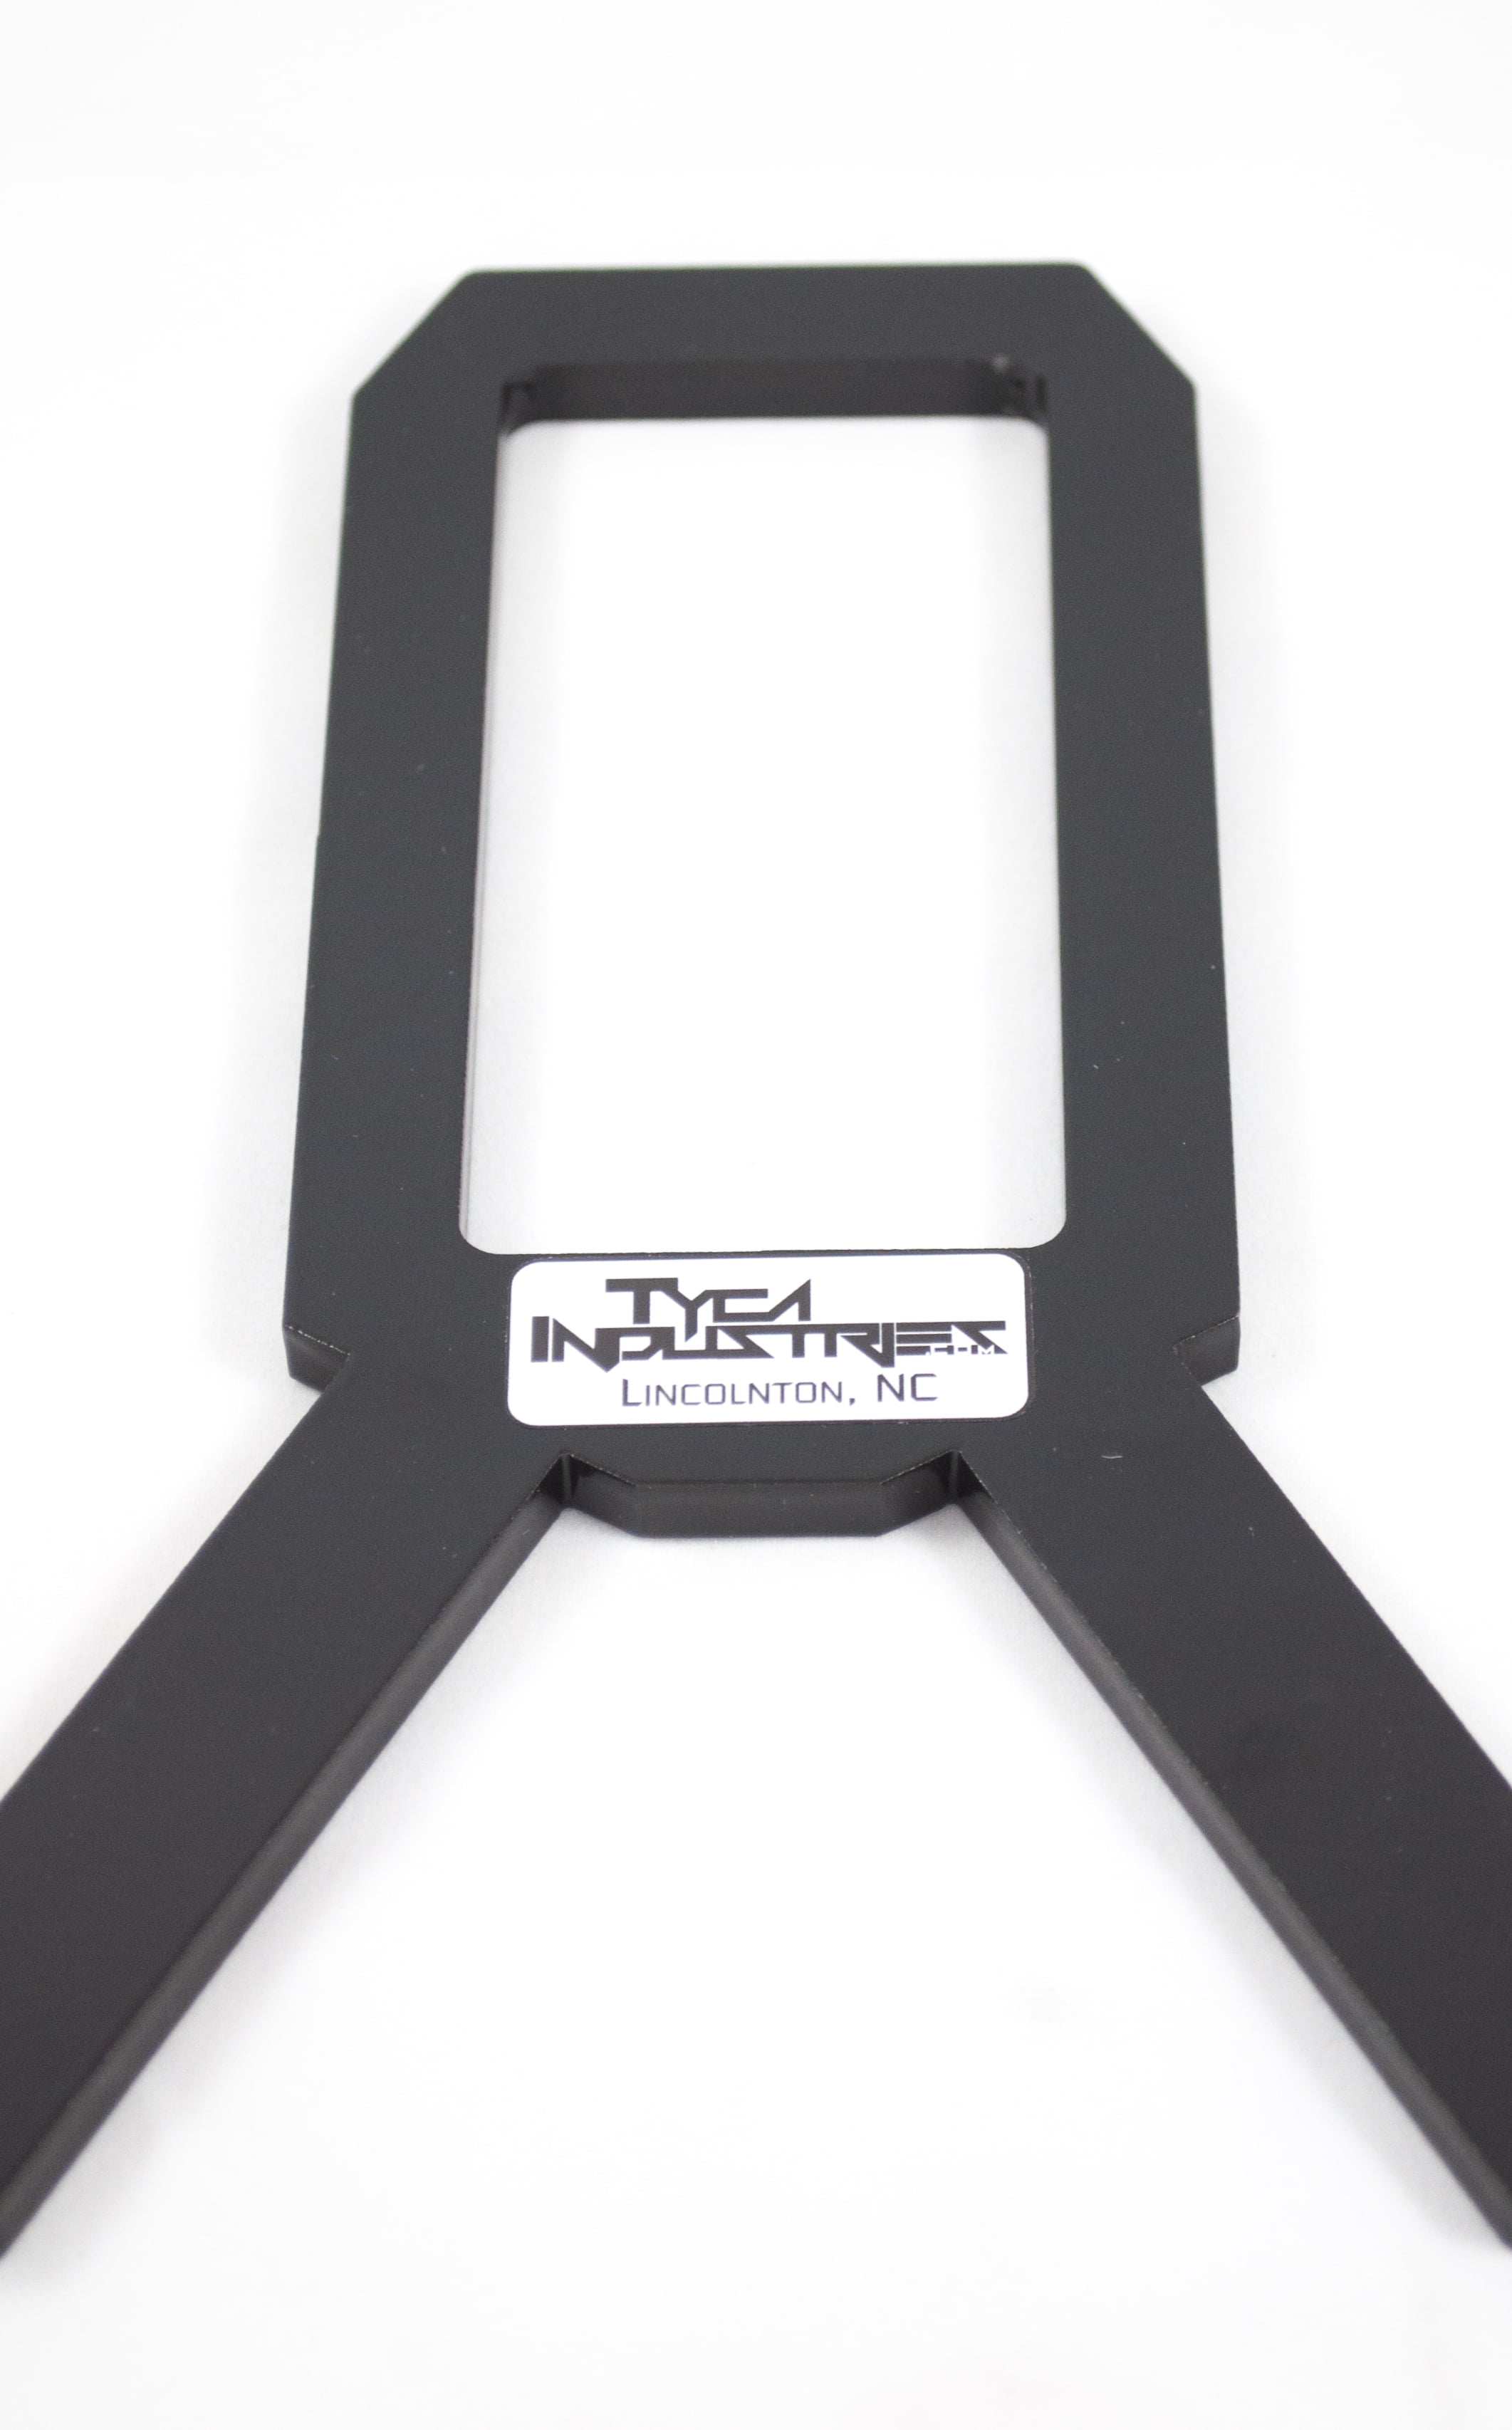 TyCa Industries 2x4 Target Stand Brackets AR500 Steel Powdercoated Most Popular Stand On 250lb Capacity 